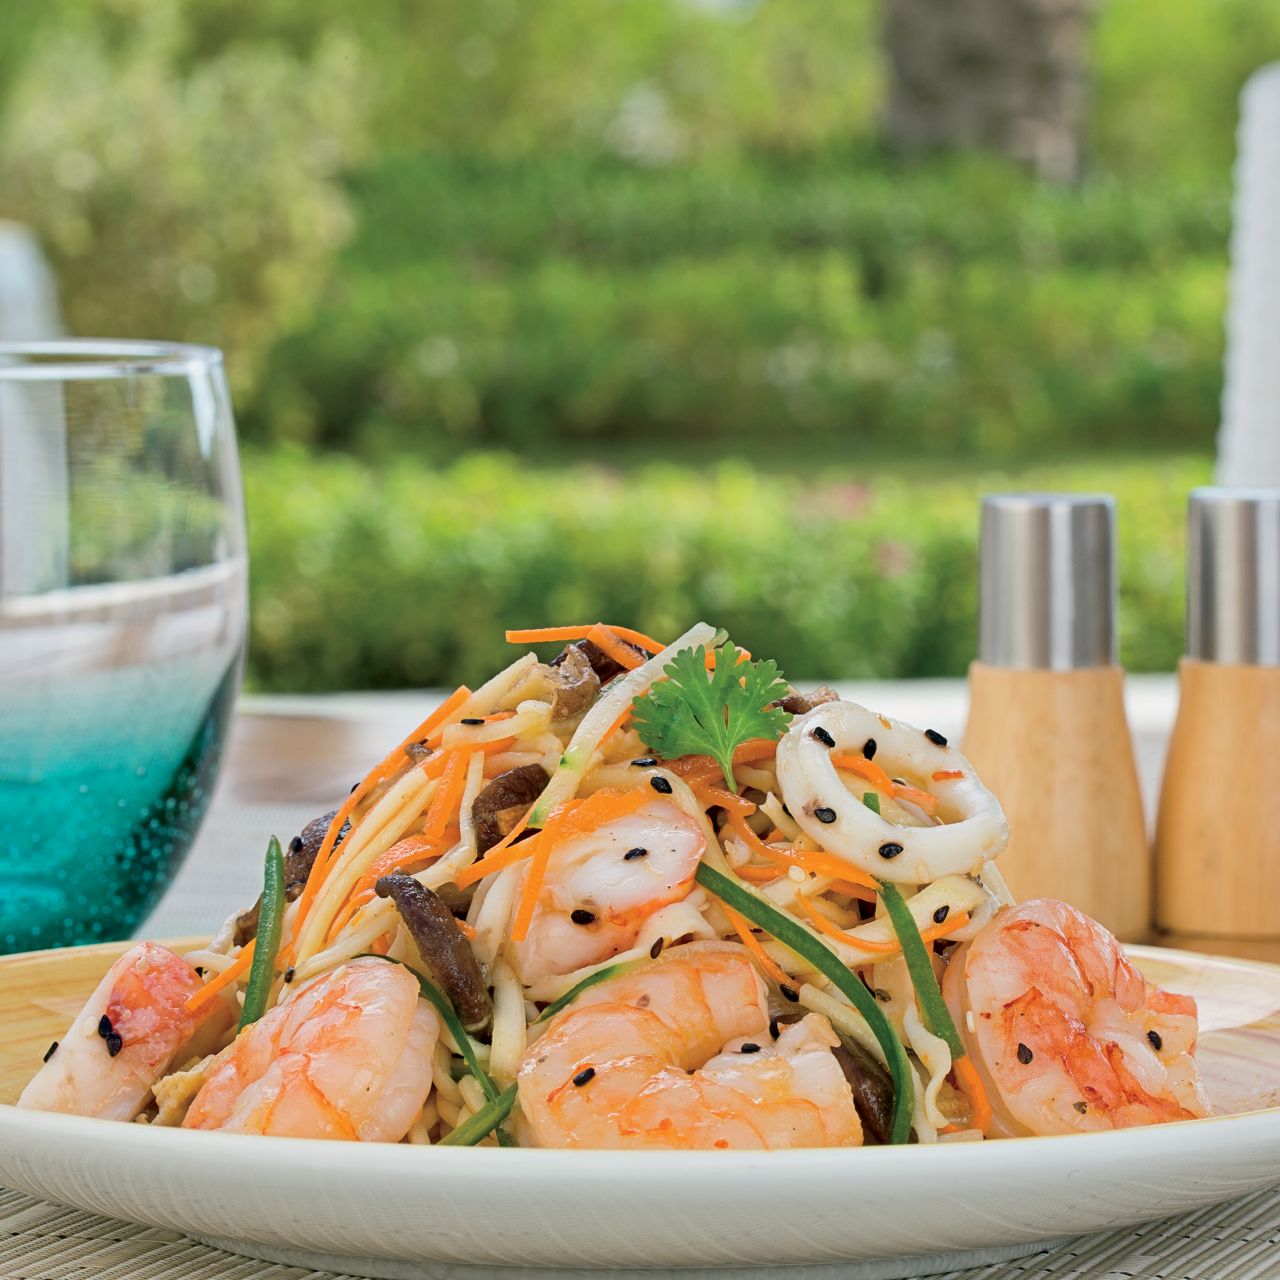 Fresh and colorful salad with shrimp set on an outdoor table